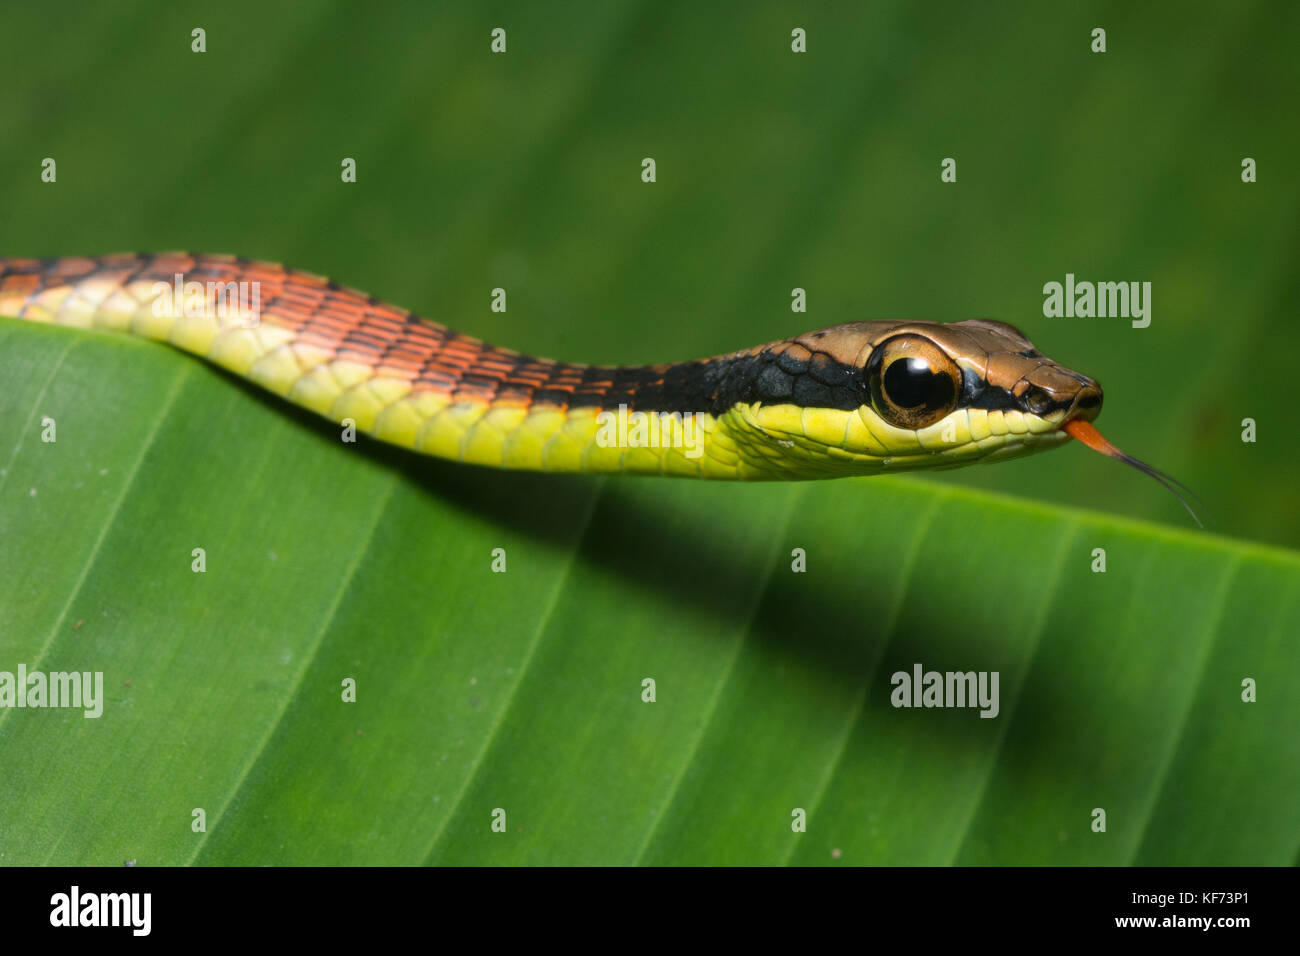 A bronzeback tree snake (Dendrelaphis sp.) resting on a leaf in Borneo. Stock Photo